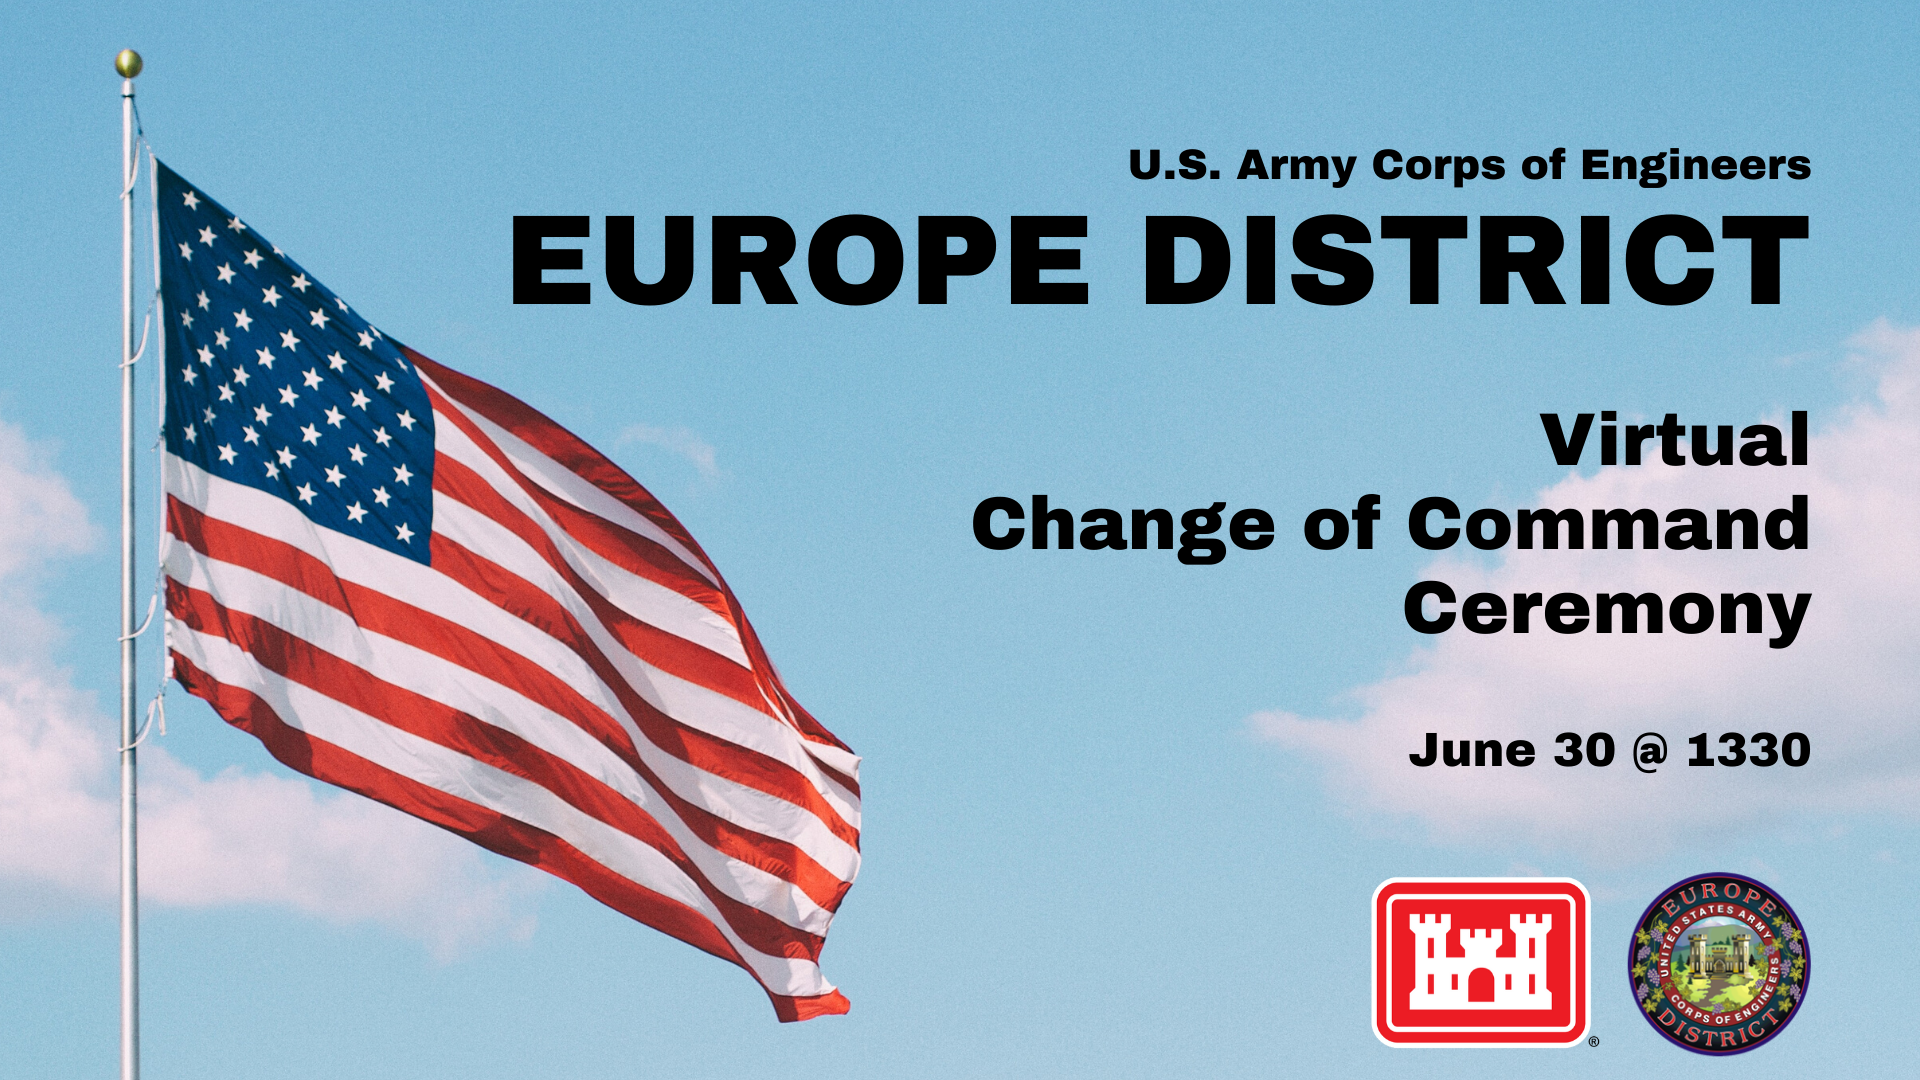 American flag with text reading: "U.S. Army Corps of Engineers Europe District Virtual Change of Command Ceremony, June 30 @1330"